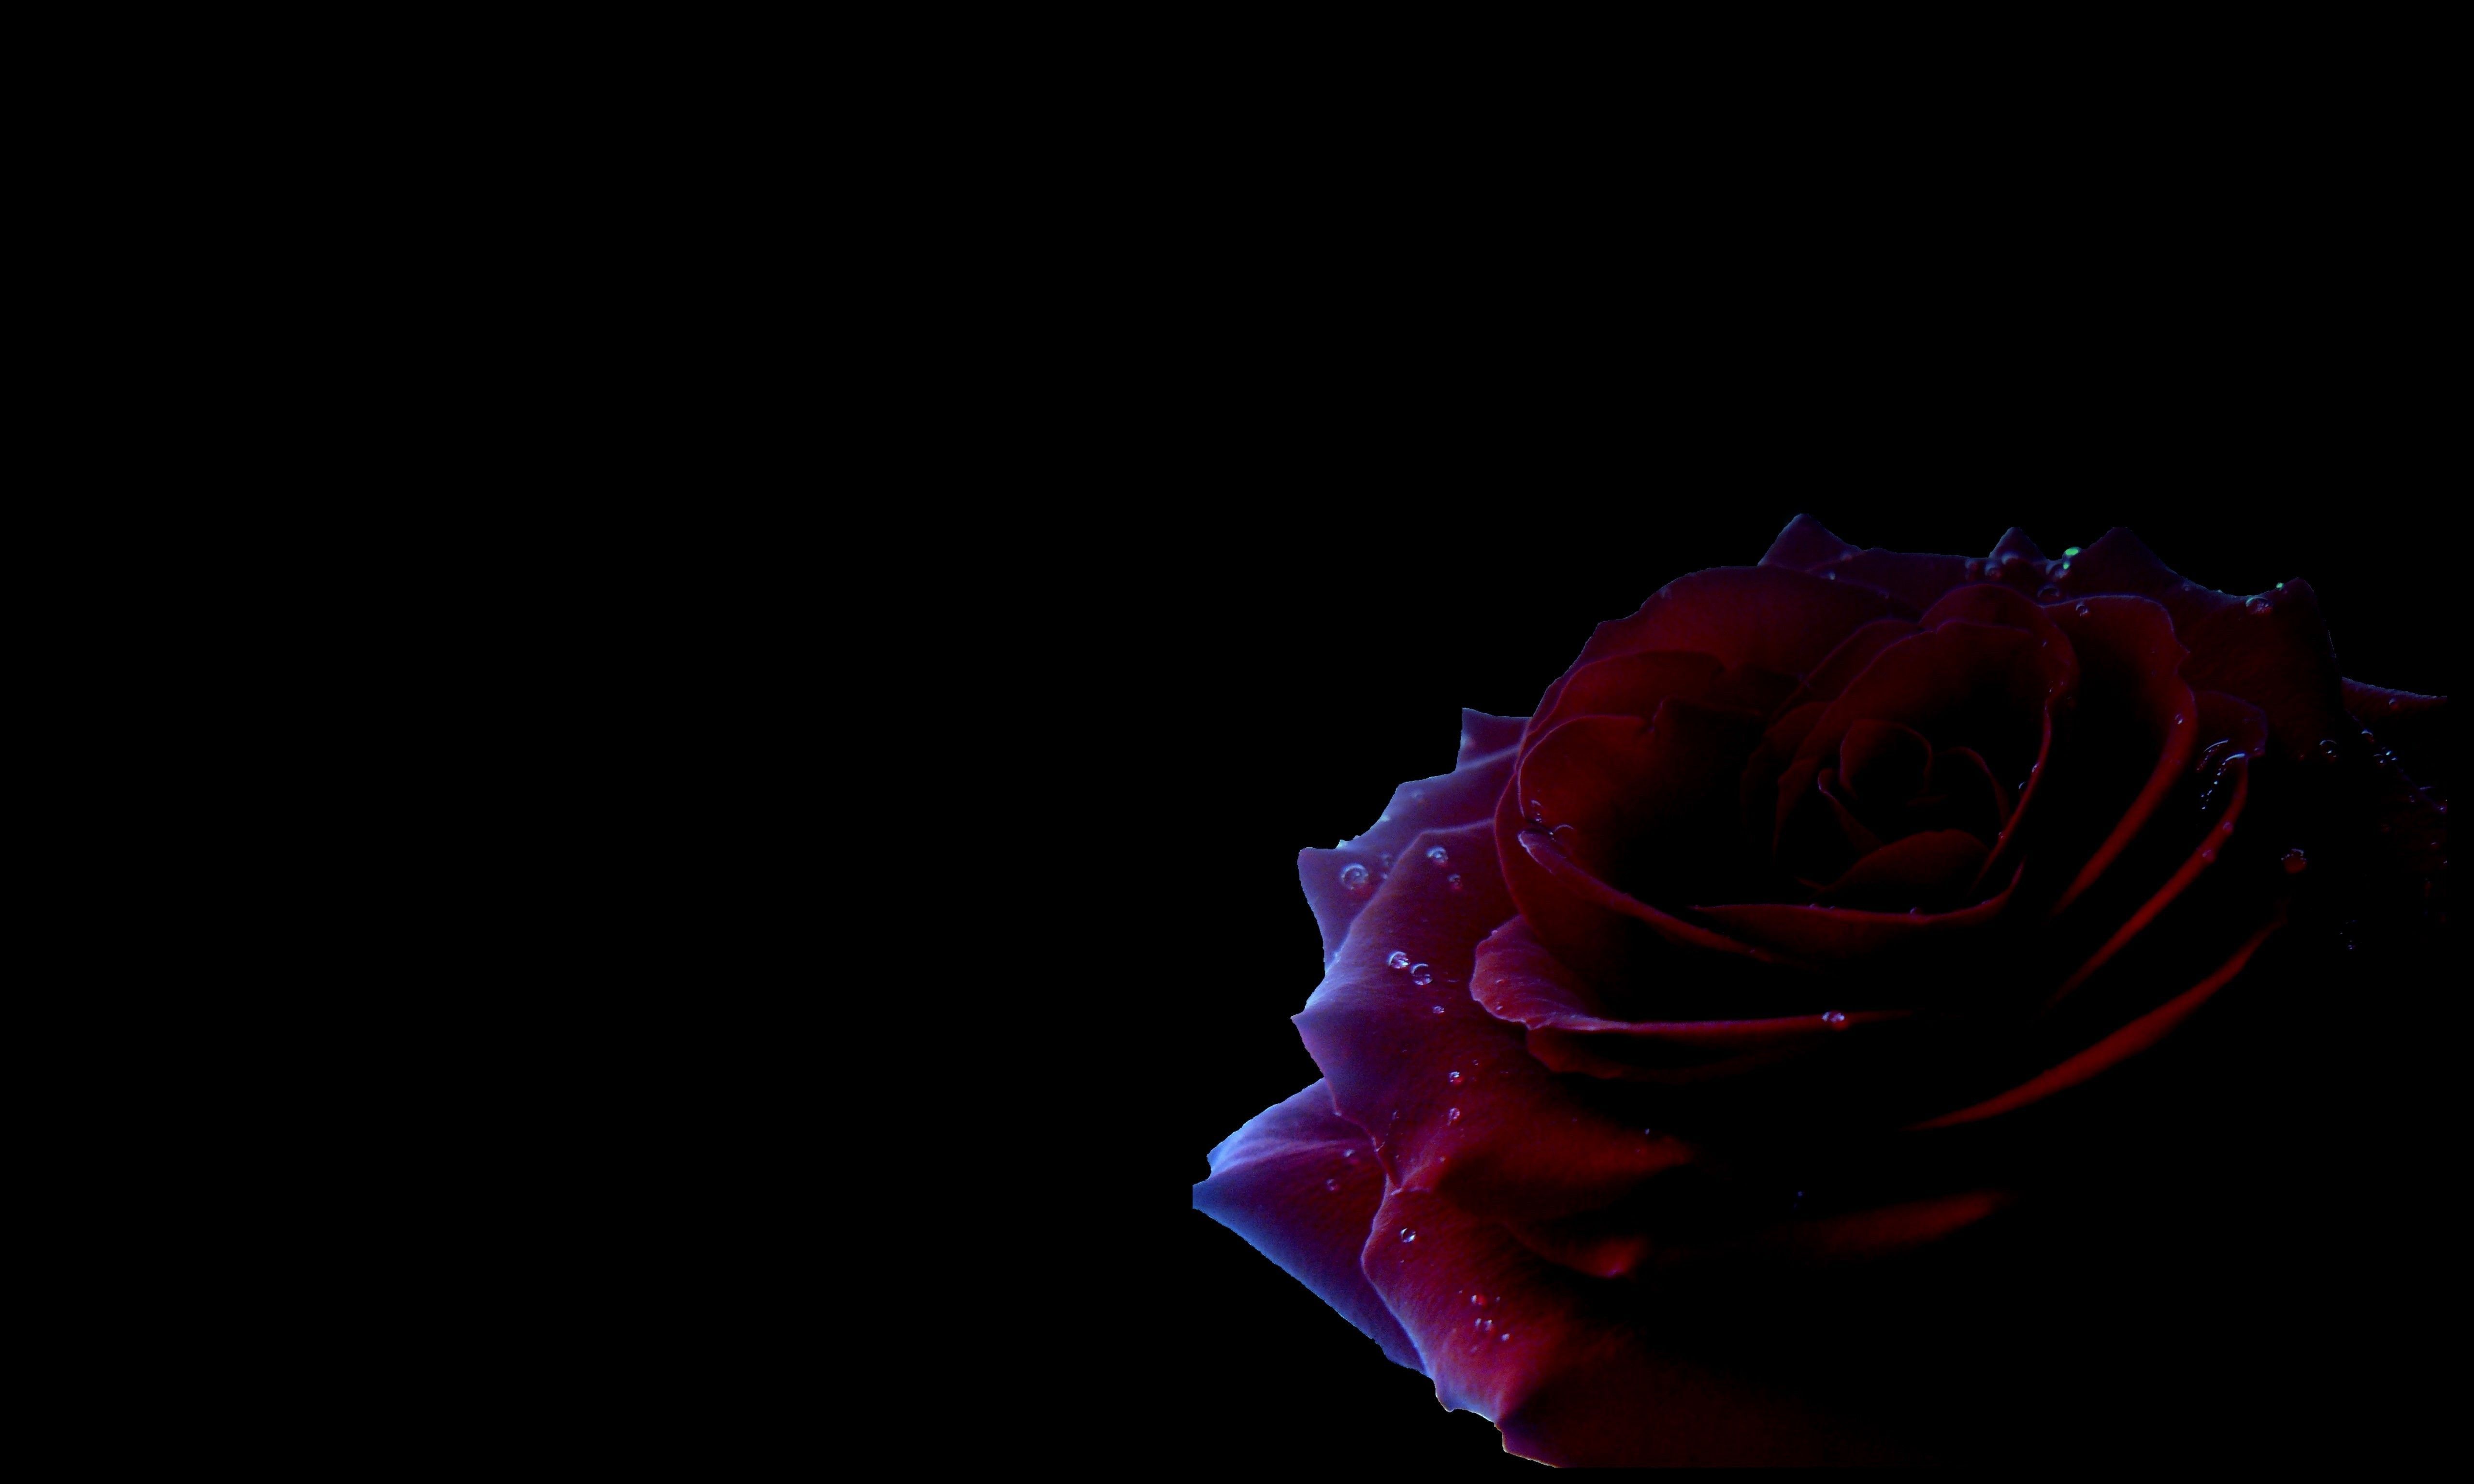 Black and Red Rose Wallpapers on WallpaperDog